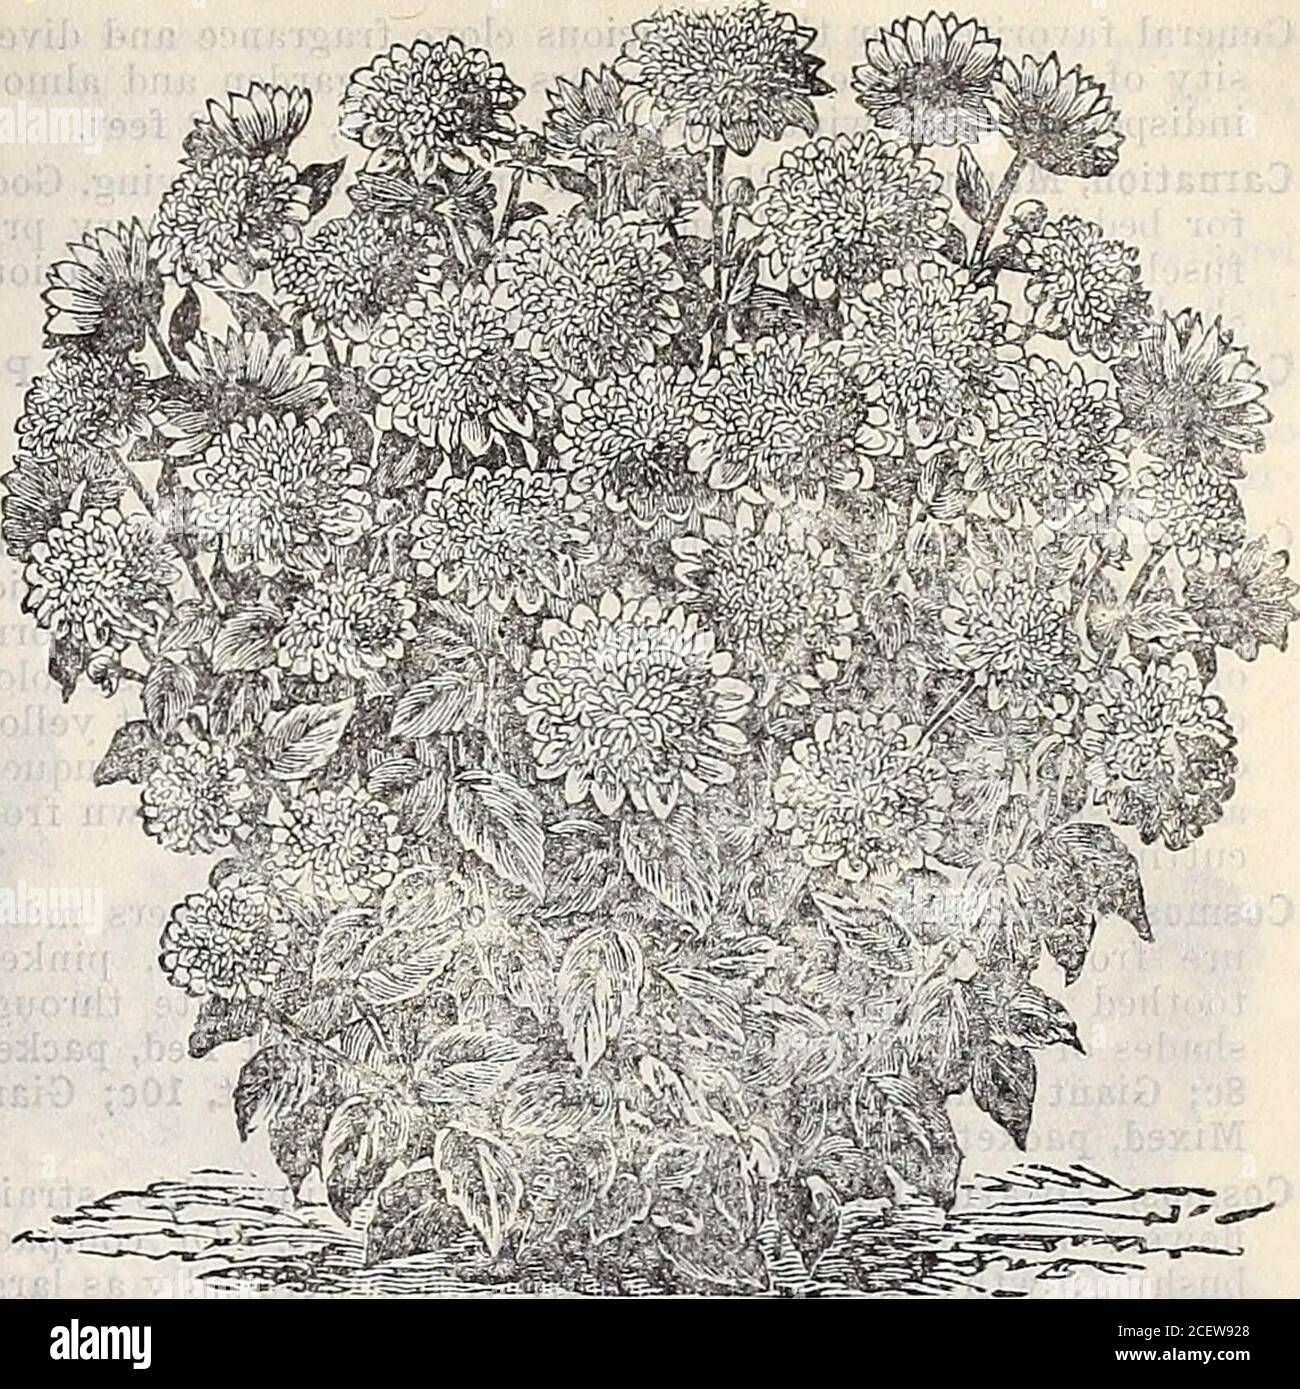 . 1906 annual catalogue / Otto Schwill & Co. Comet or Plume Aster. ». Semples Branching Aster. Asters, 0 ueen of ths Market—The earliest variety; gracefuldouble flower; long stemmed. Mixed colors. Packet, 8c. Asters, China—A general mixture of fine sorts and colors.Packet, 3c. Asters, Mixed—This mixture contains the cream of all varie-ties. It cannot fail to please you. Packet, 3c. Balloon Vine—A rapid growing climber which succeeds best inwarm soil. Flowers white; seed vessels look like small bal-loons. Packet, 4c. BALSAM—(Ladys Slipper). A favorite garden flower, producing brilliant colored Stock Photo